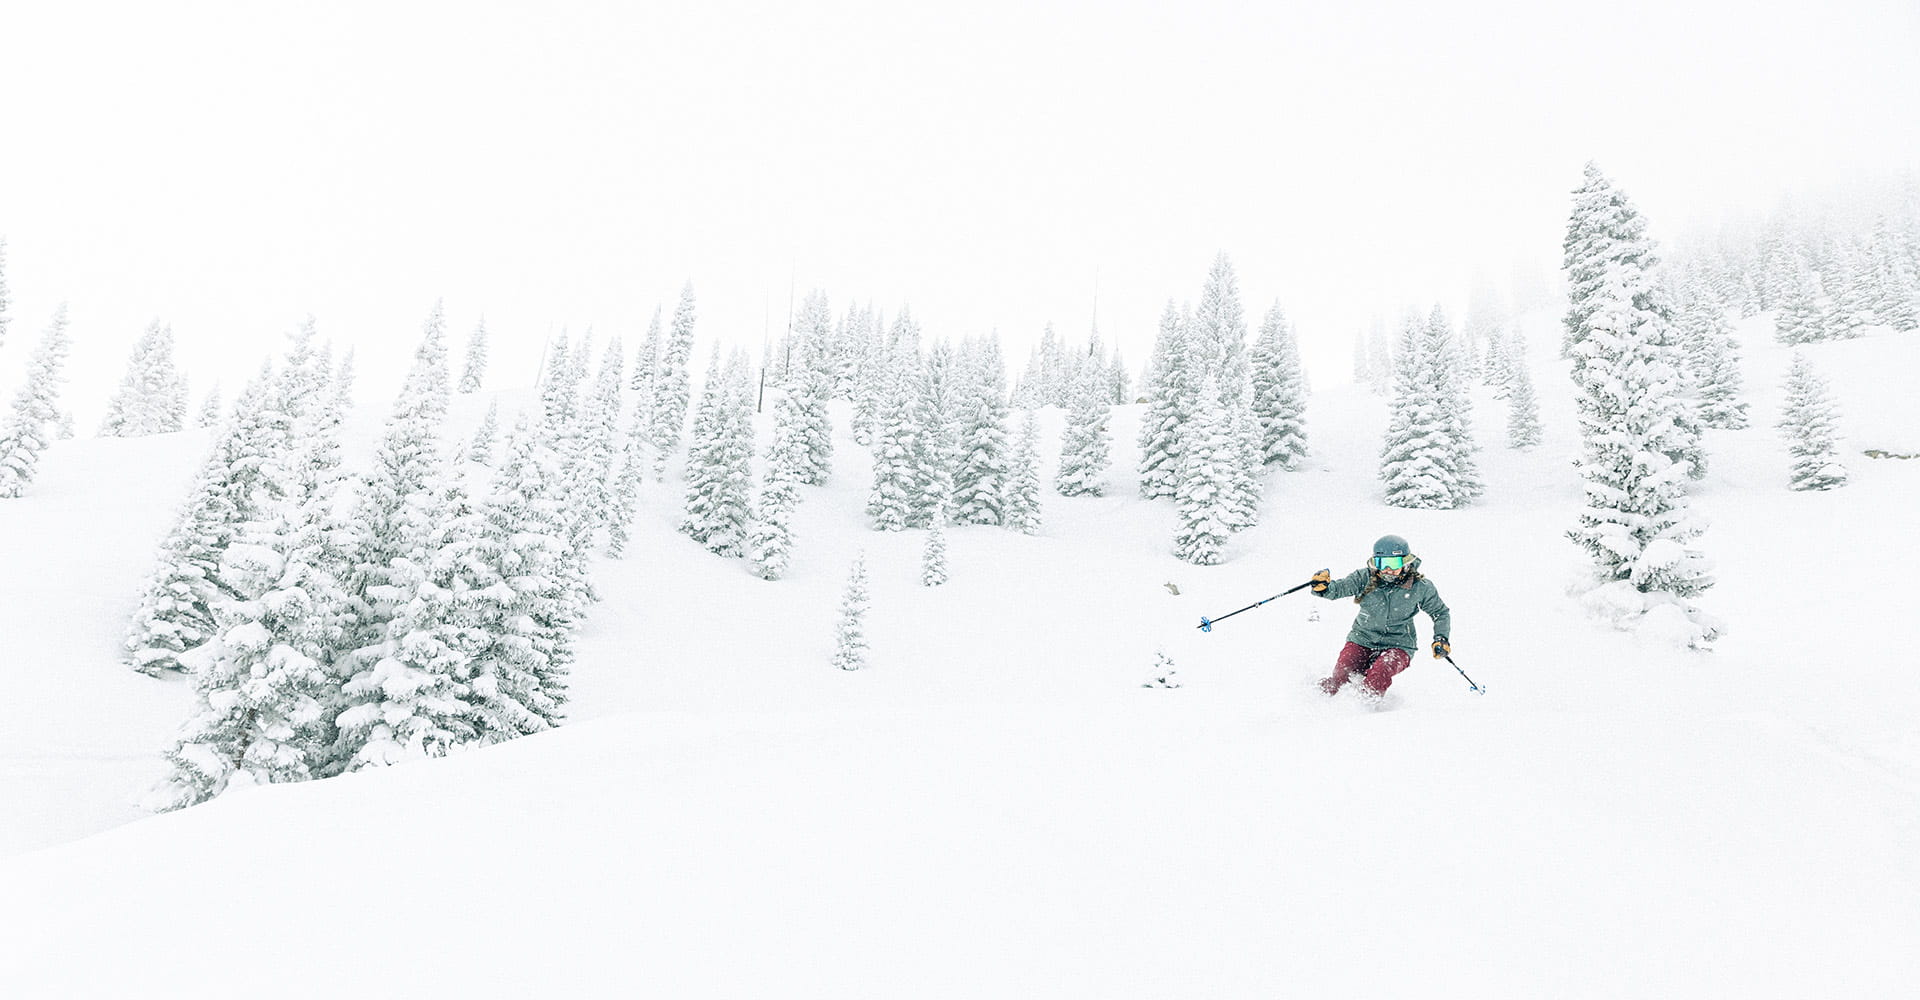 Solo skier on a powder day in the glades of Aspen Snowmass